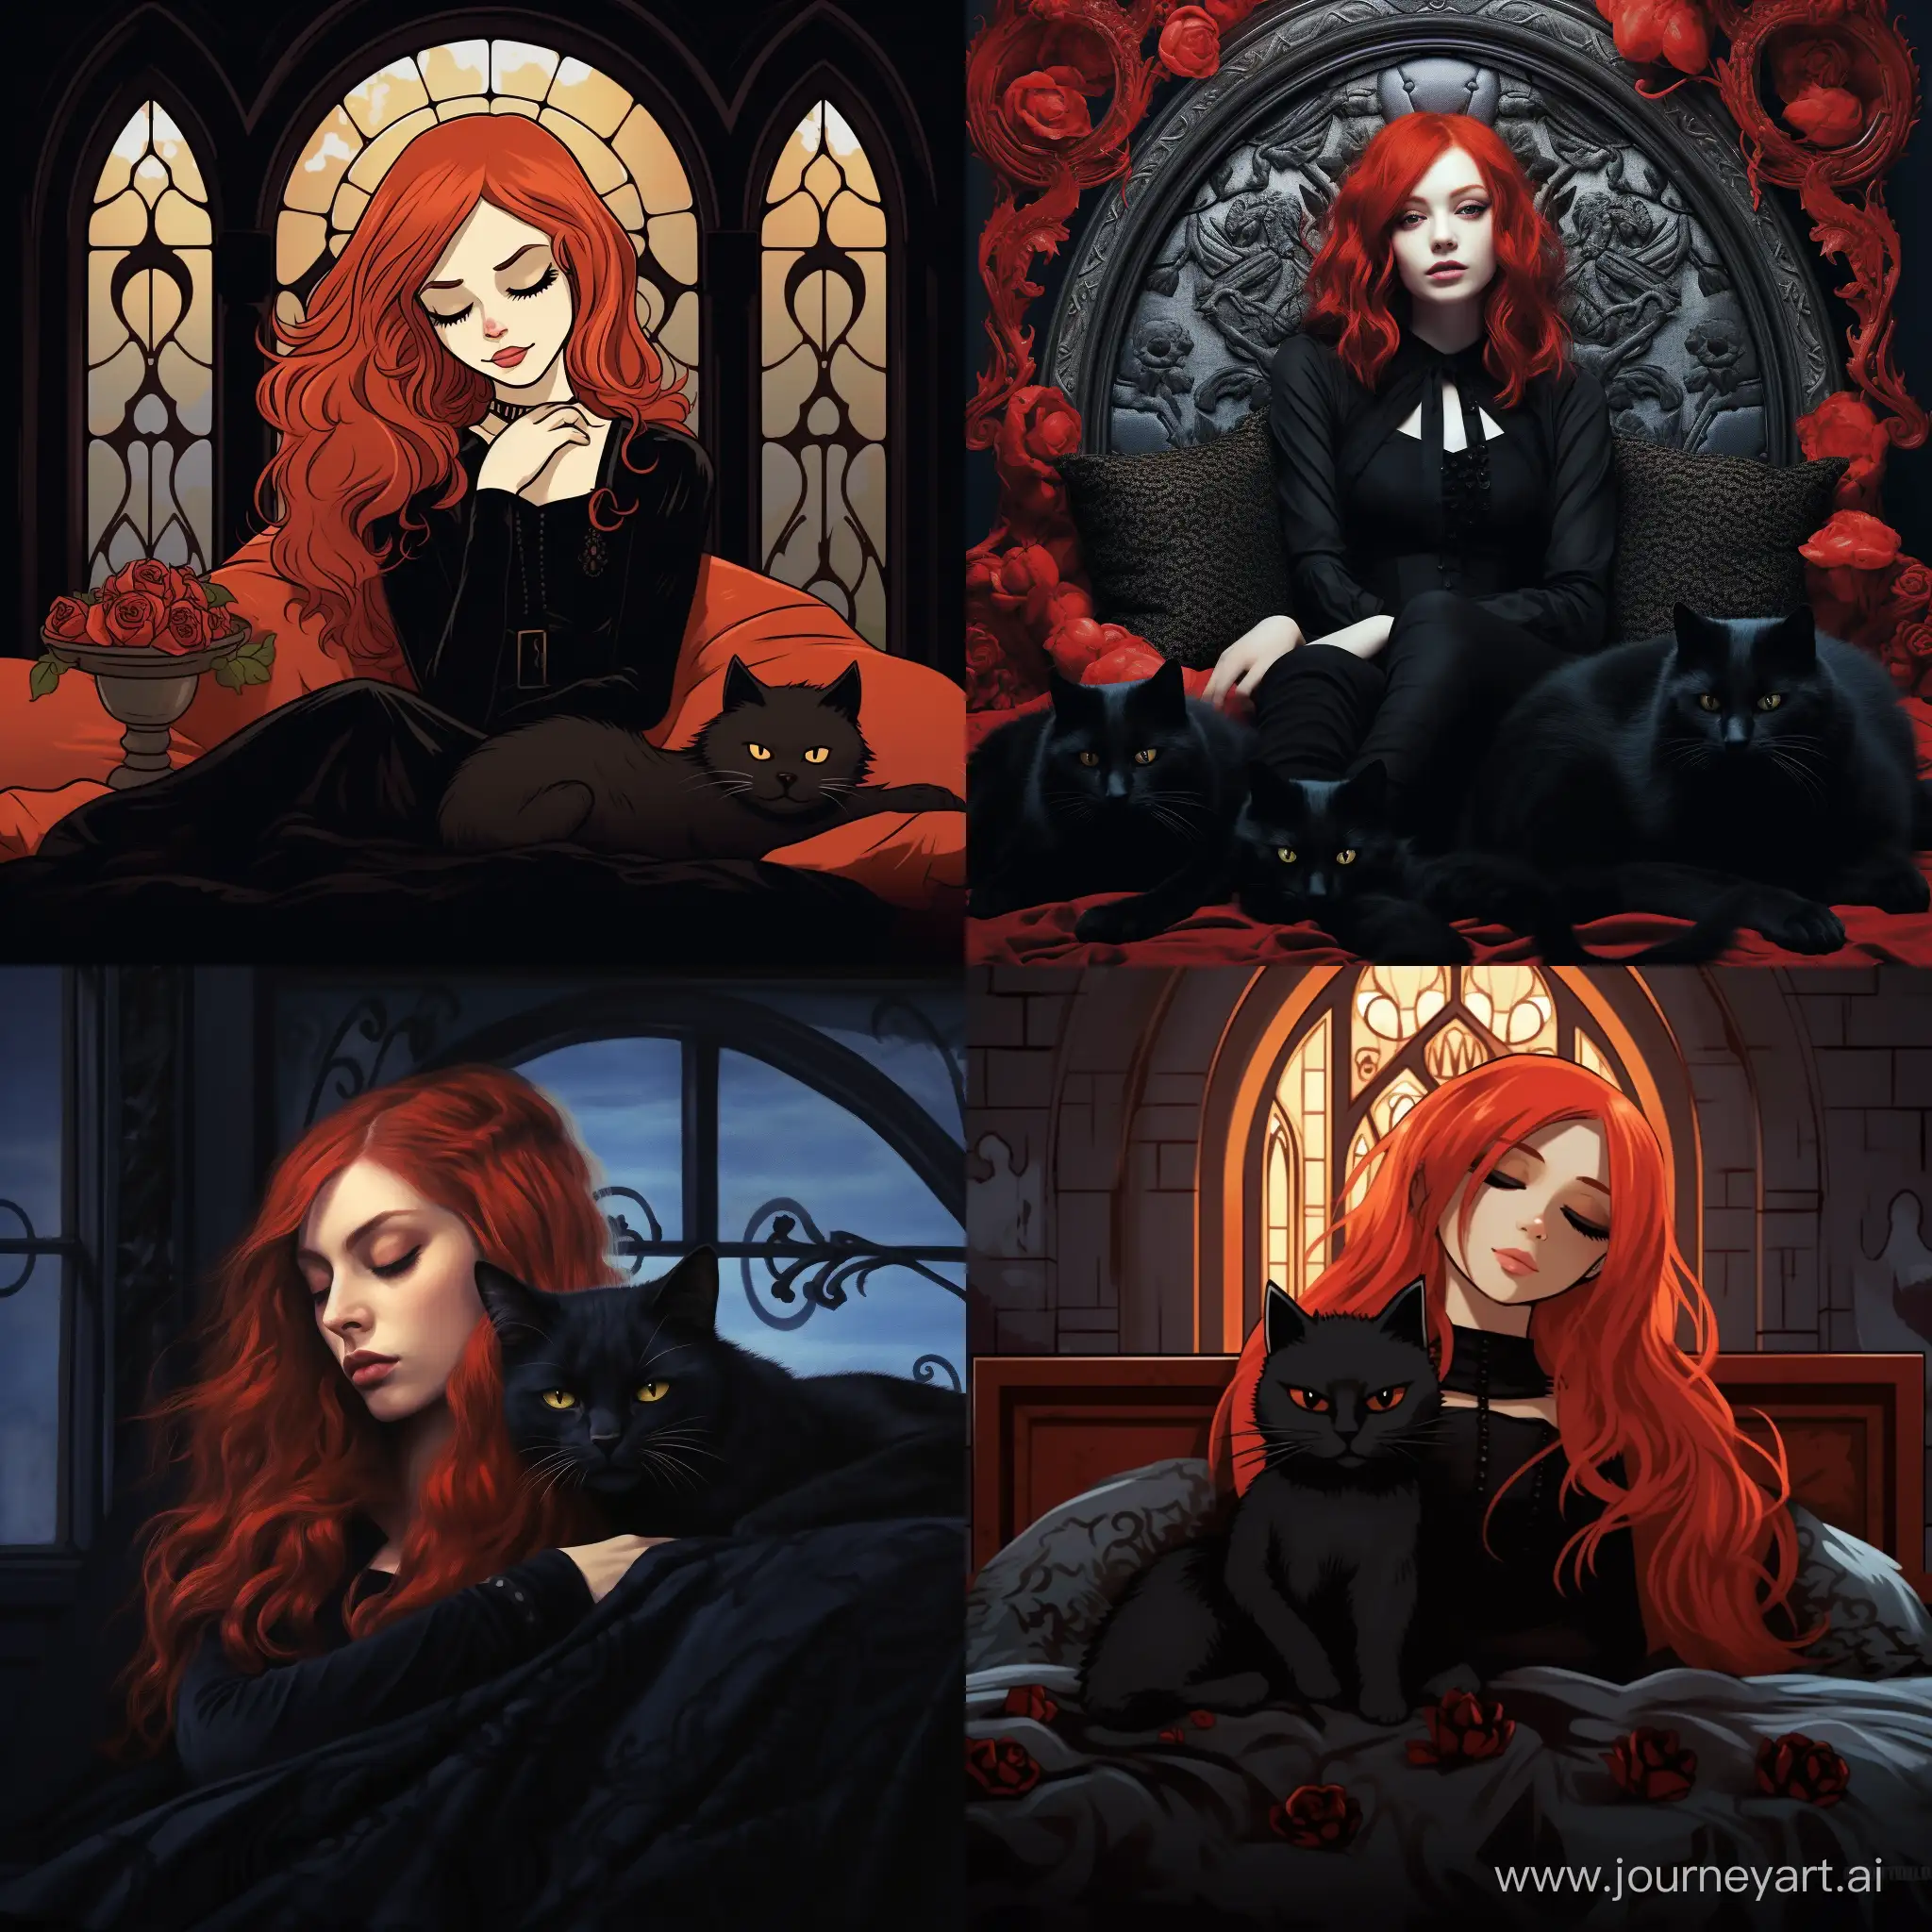 RedHaired-Gothic-Girl-Sleeping-with-GothicStyle-Cat-on-Bed